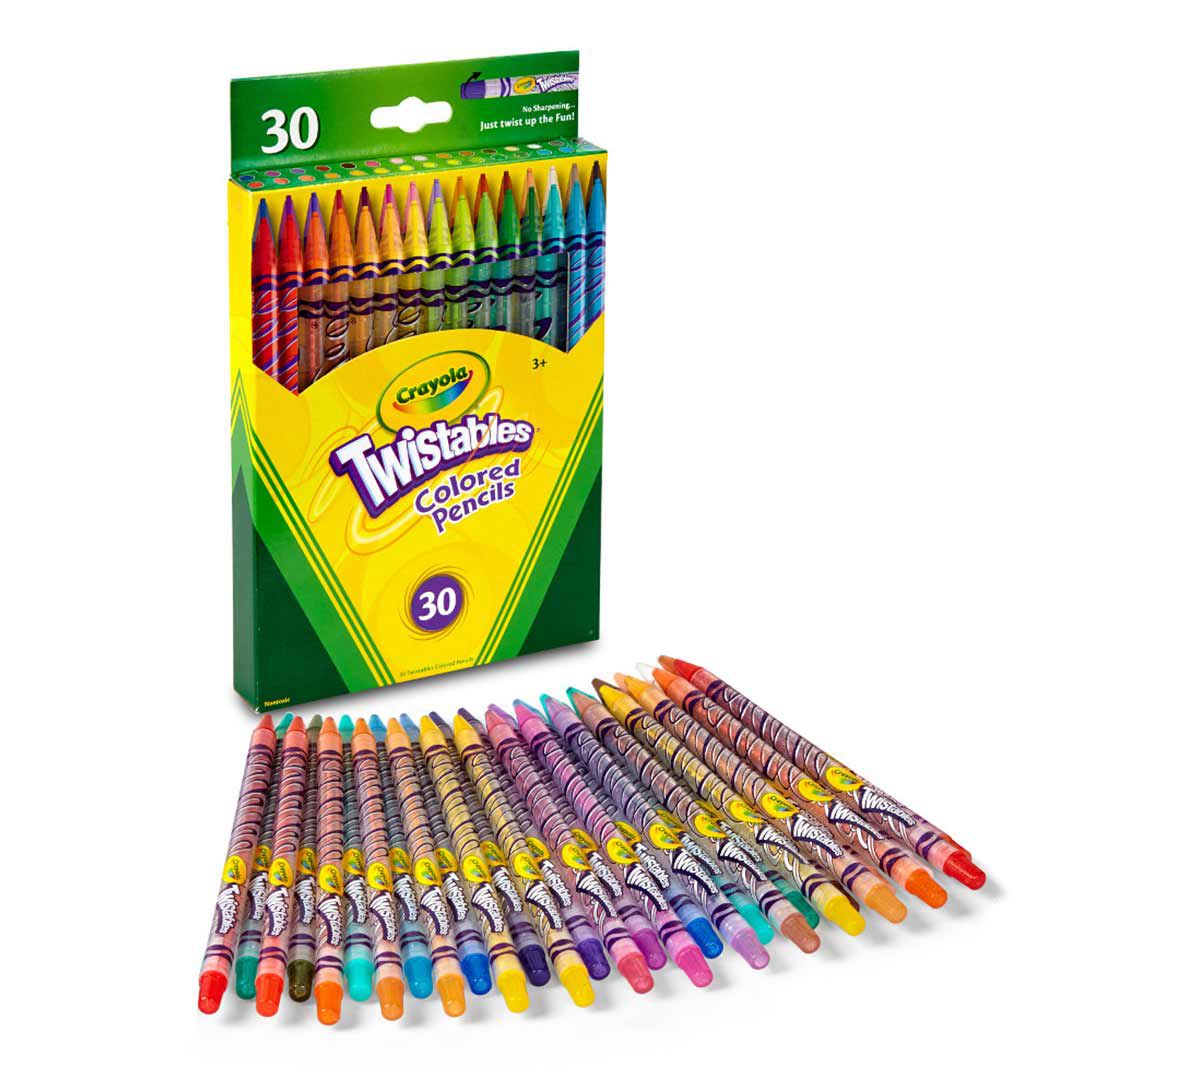 Assorted Crayola 68-7409 Twistable Colored Pencils Stocking Stuffer Gift 30 Count 